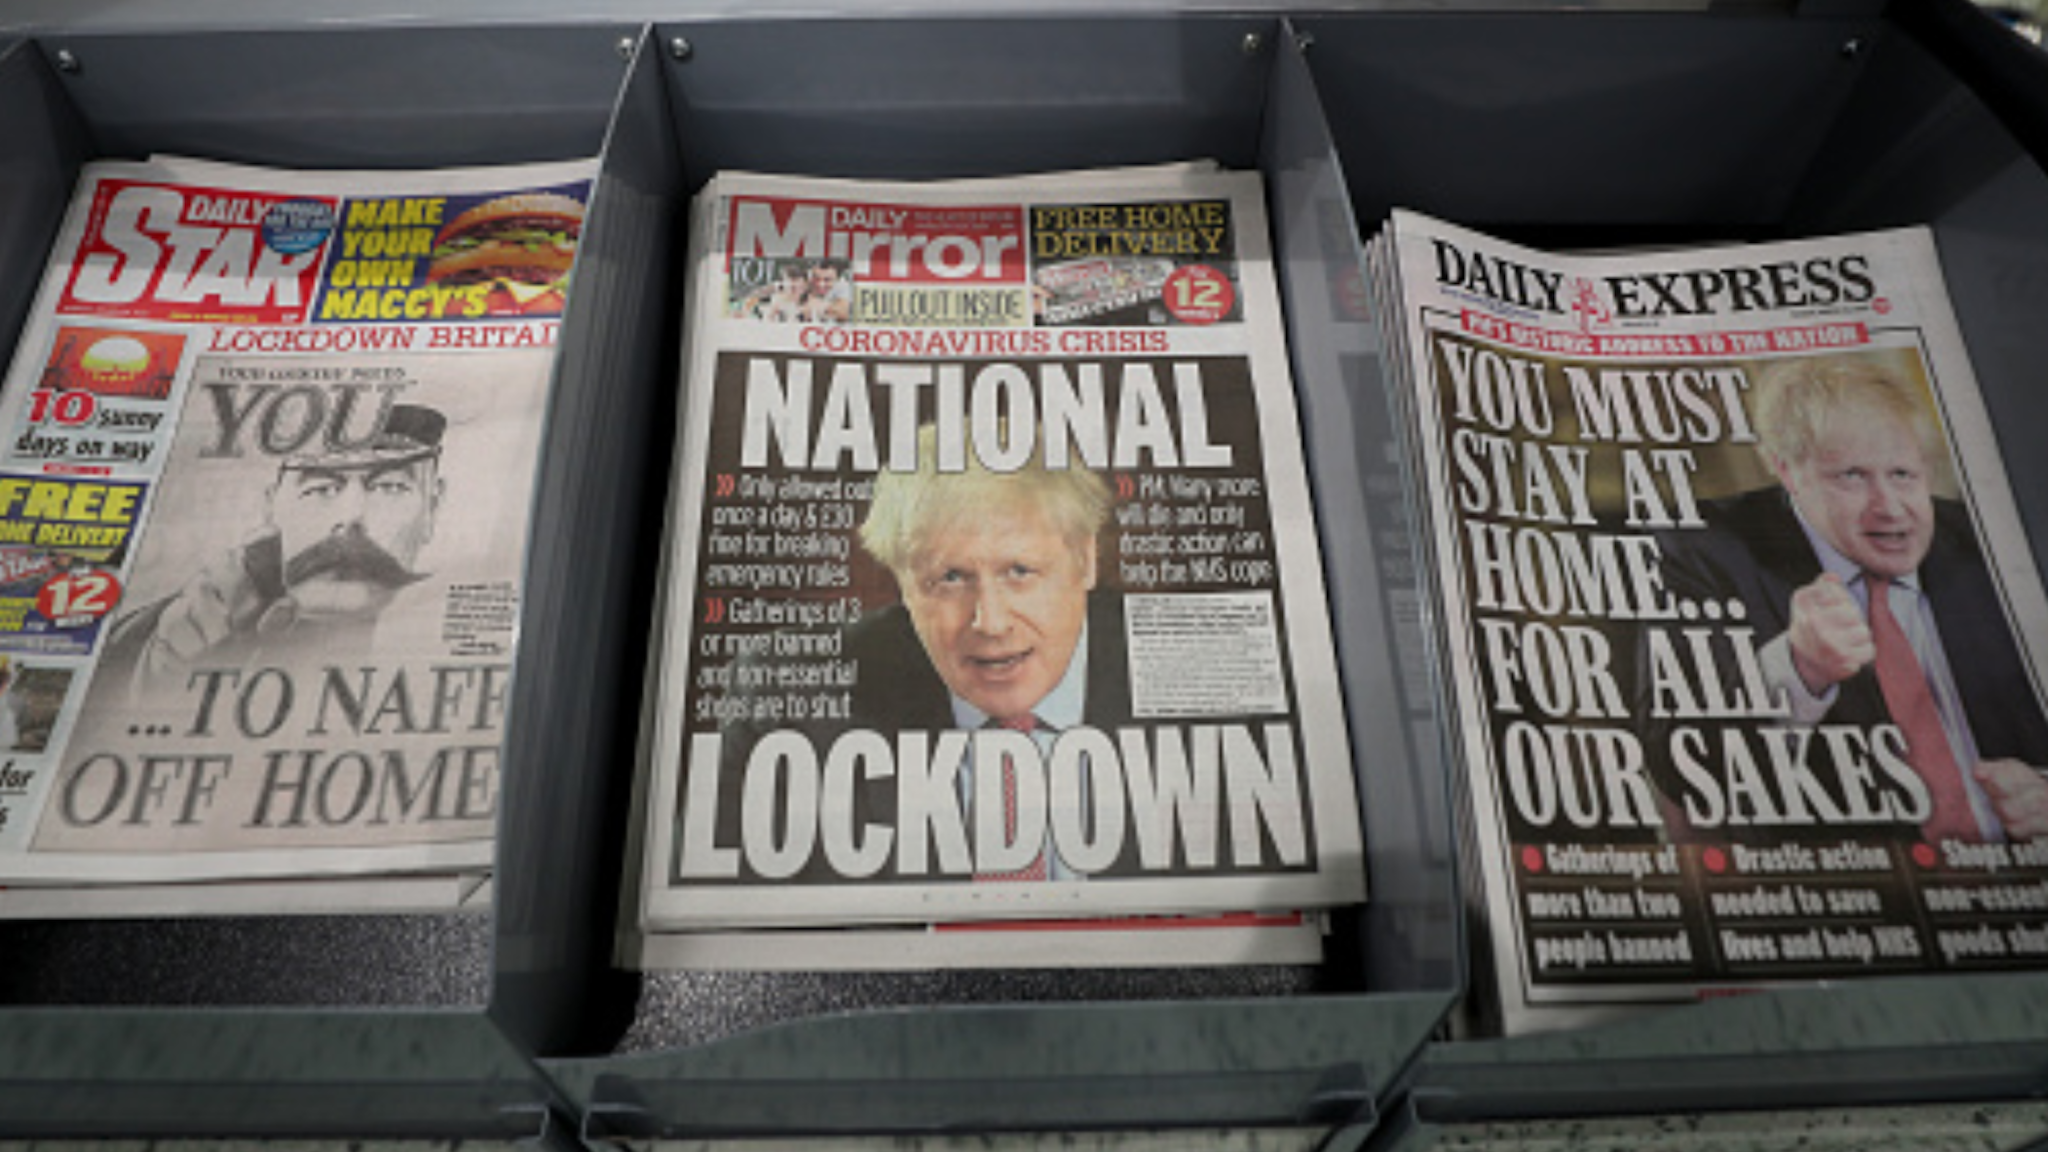 Today's newspapers displayed at a local shop in Malvern, the day after Prime Minister Boris Johnson put the UK in lockdown to help curb the spread of the coronavirus.